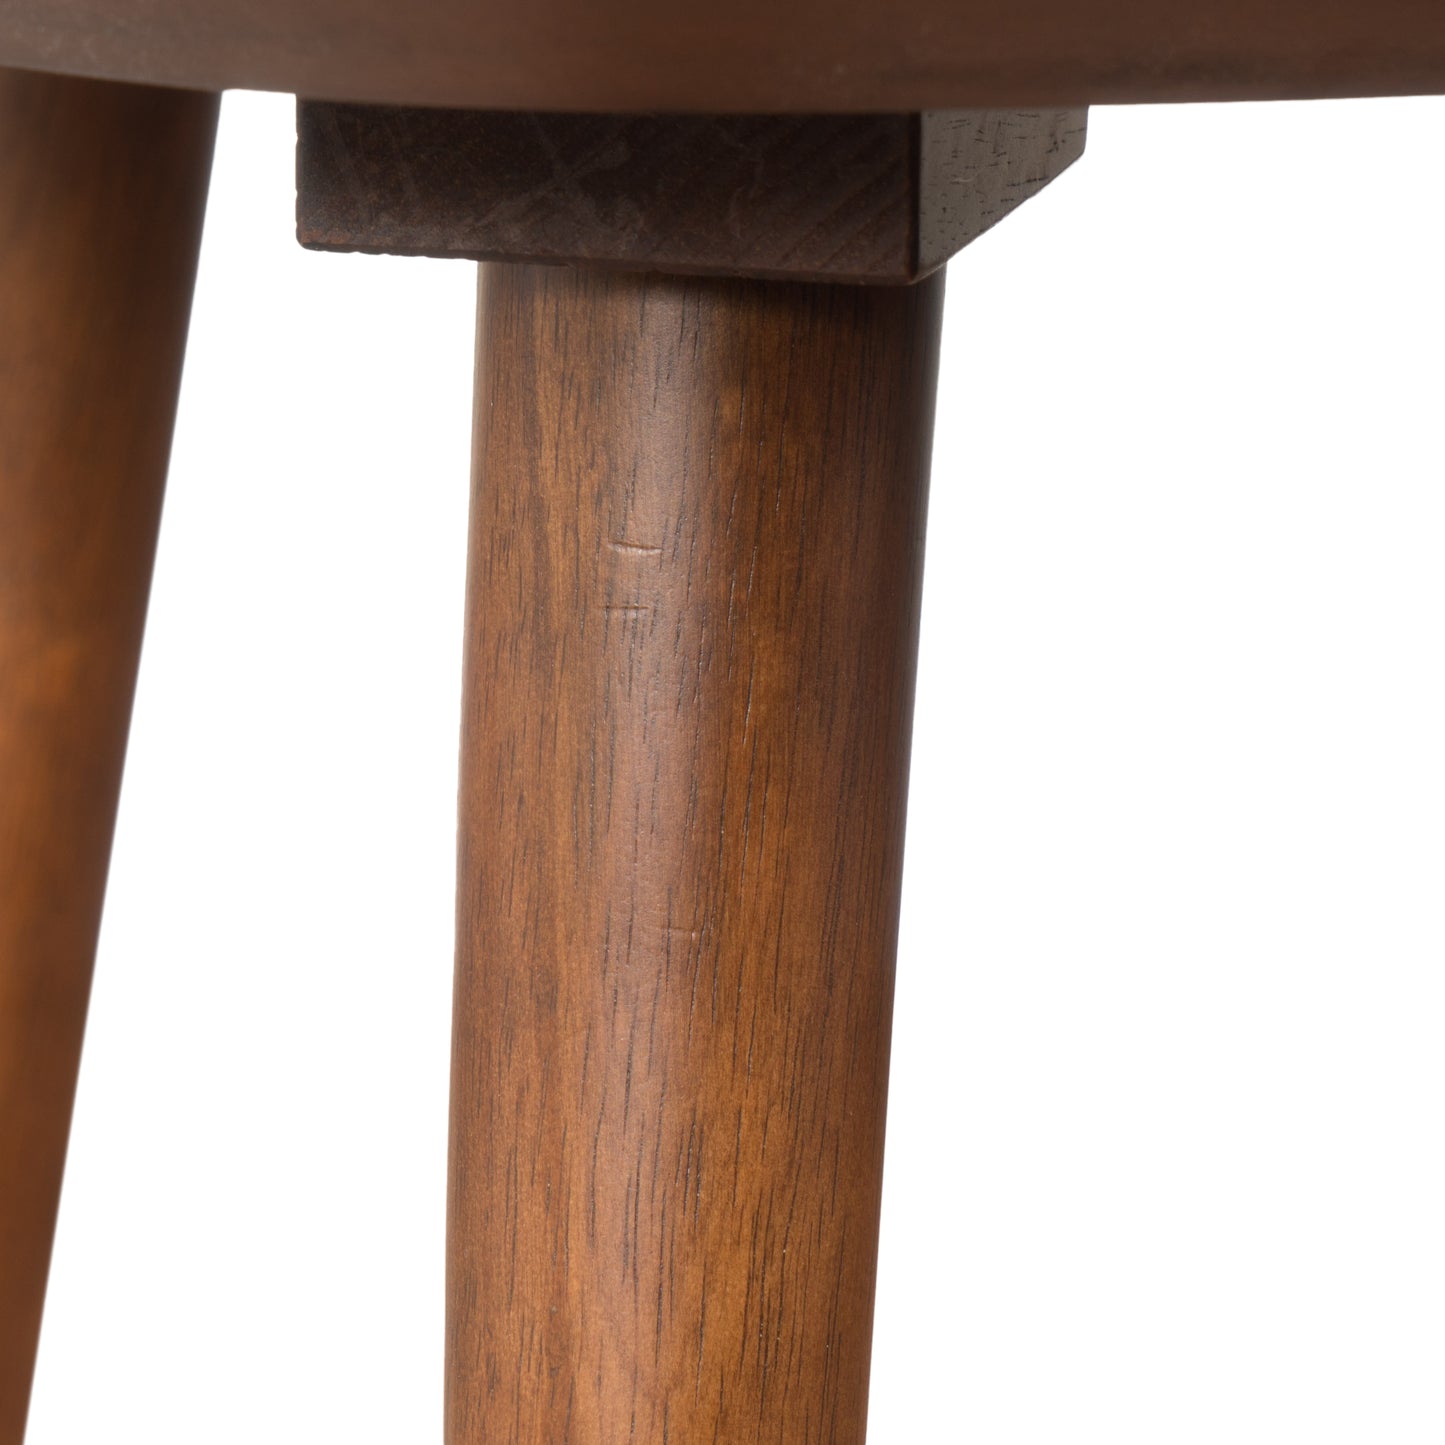 Finnian Wood Finish End Table